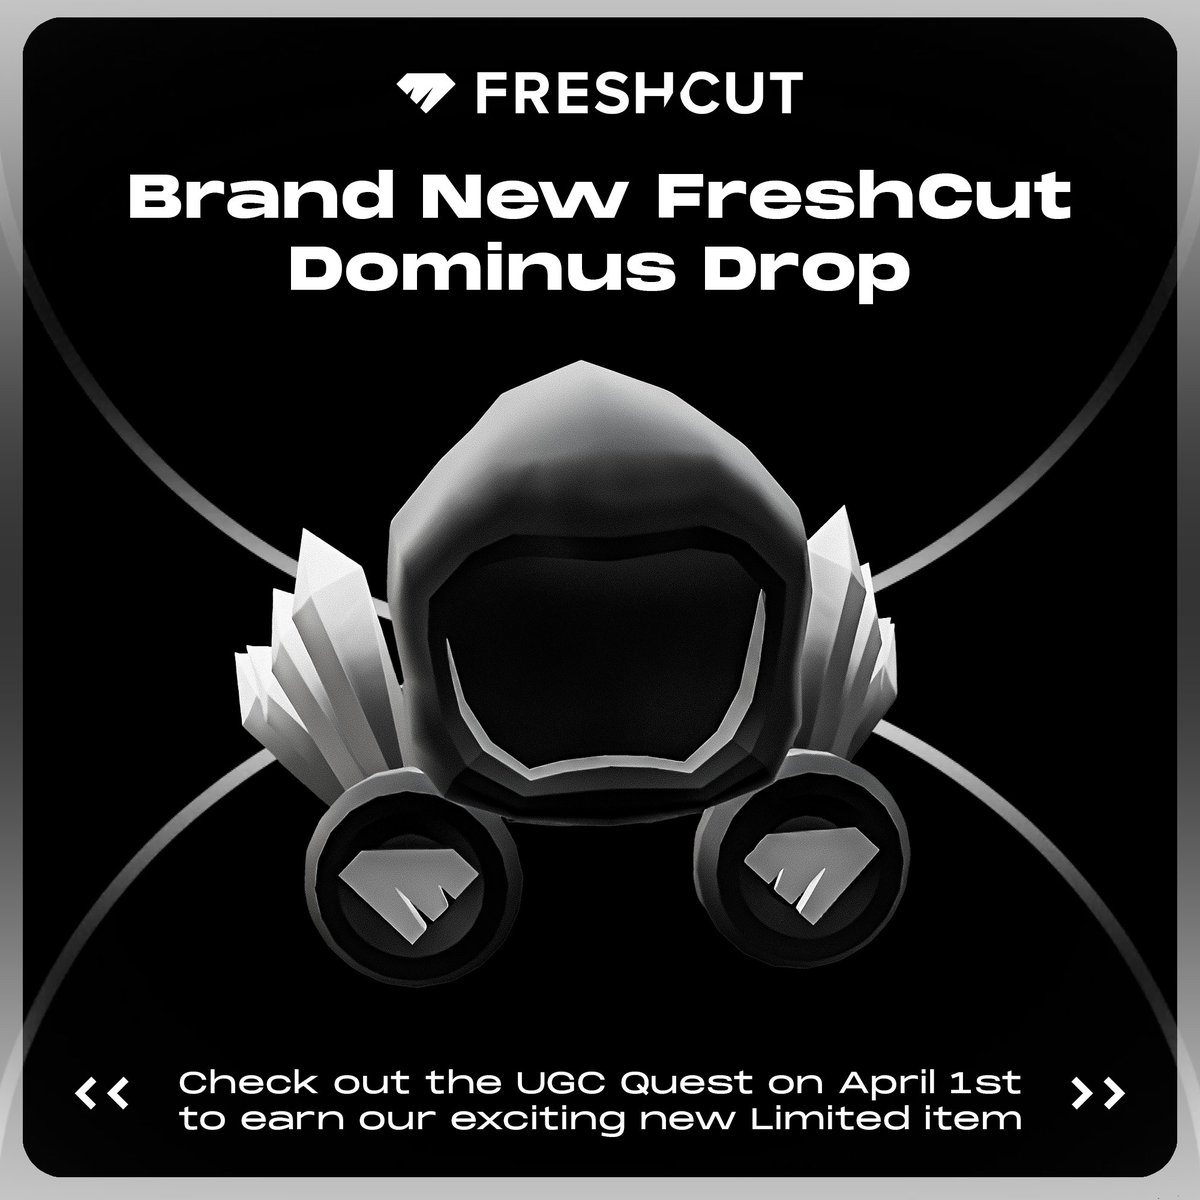 🗻🍀THE LAST Giveaway Freshcut Dominus🍀🗻 (Exclusive)
Rules:
🔺Follow me in Twitter and Roblox
💓Like
🔁RETWEET
🫠✍️Make a draw or anything funny
End in 8 days
Note:The Dominus is not real but is a free UGC Exclusive.
#Roblox #ROBLOX #RobloxFreeUGC #RobloxUGC #RobloxUGCLimited